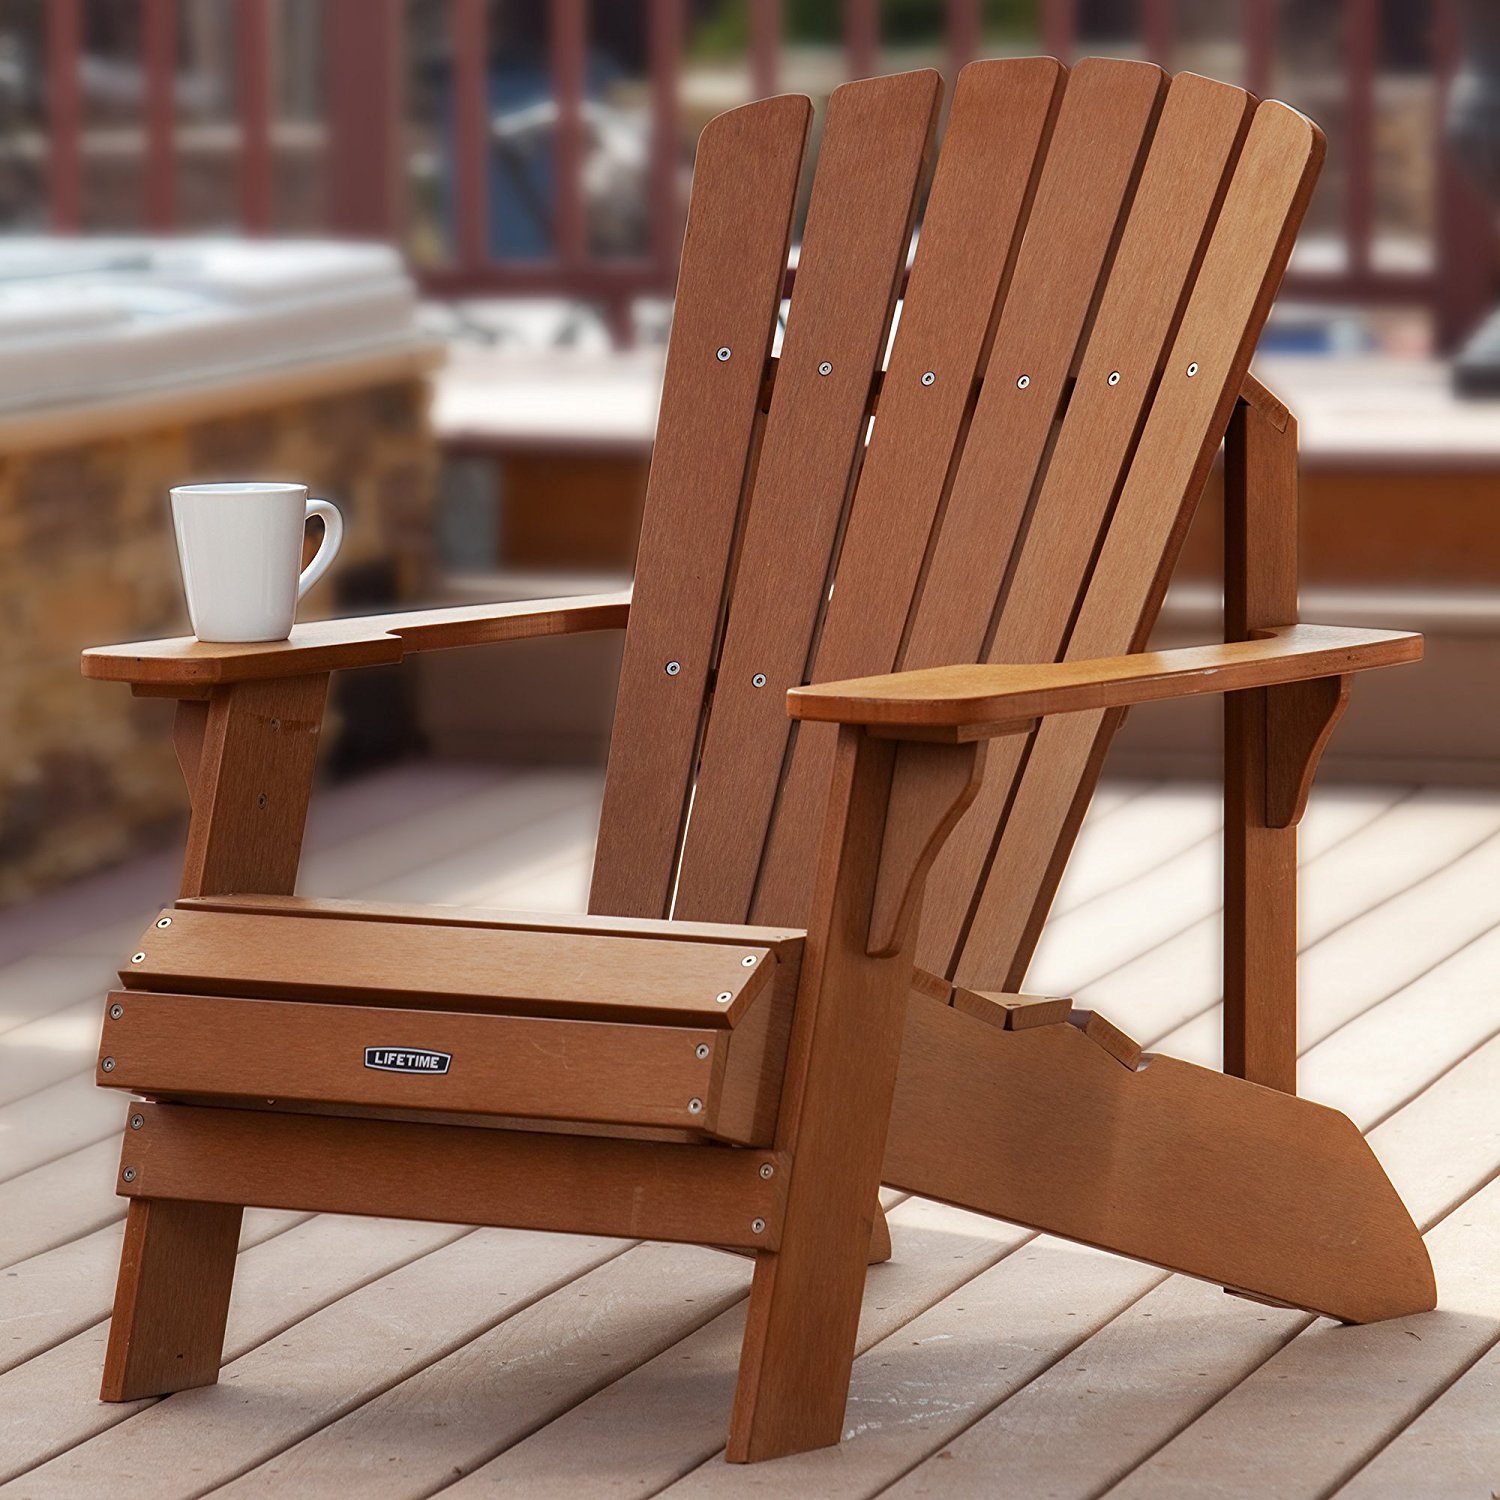 Poly Resin Adirondack Chairs. Reviews and Buyer's Guide! - OutsideModern